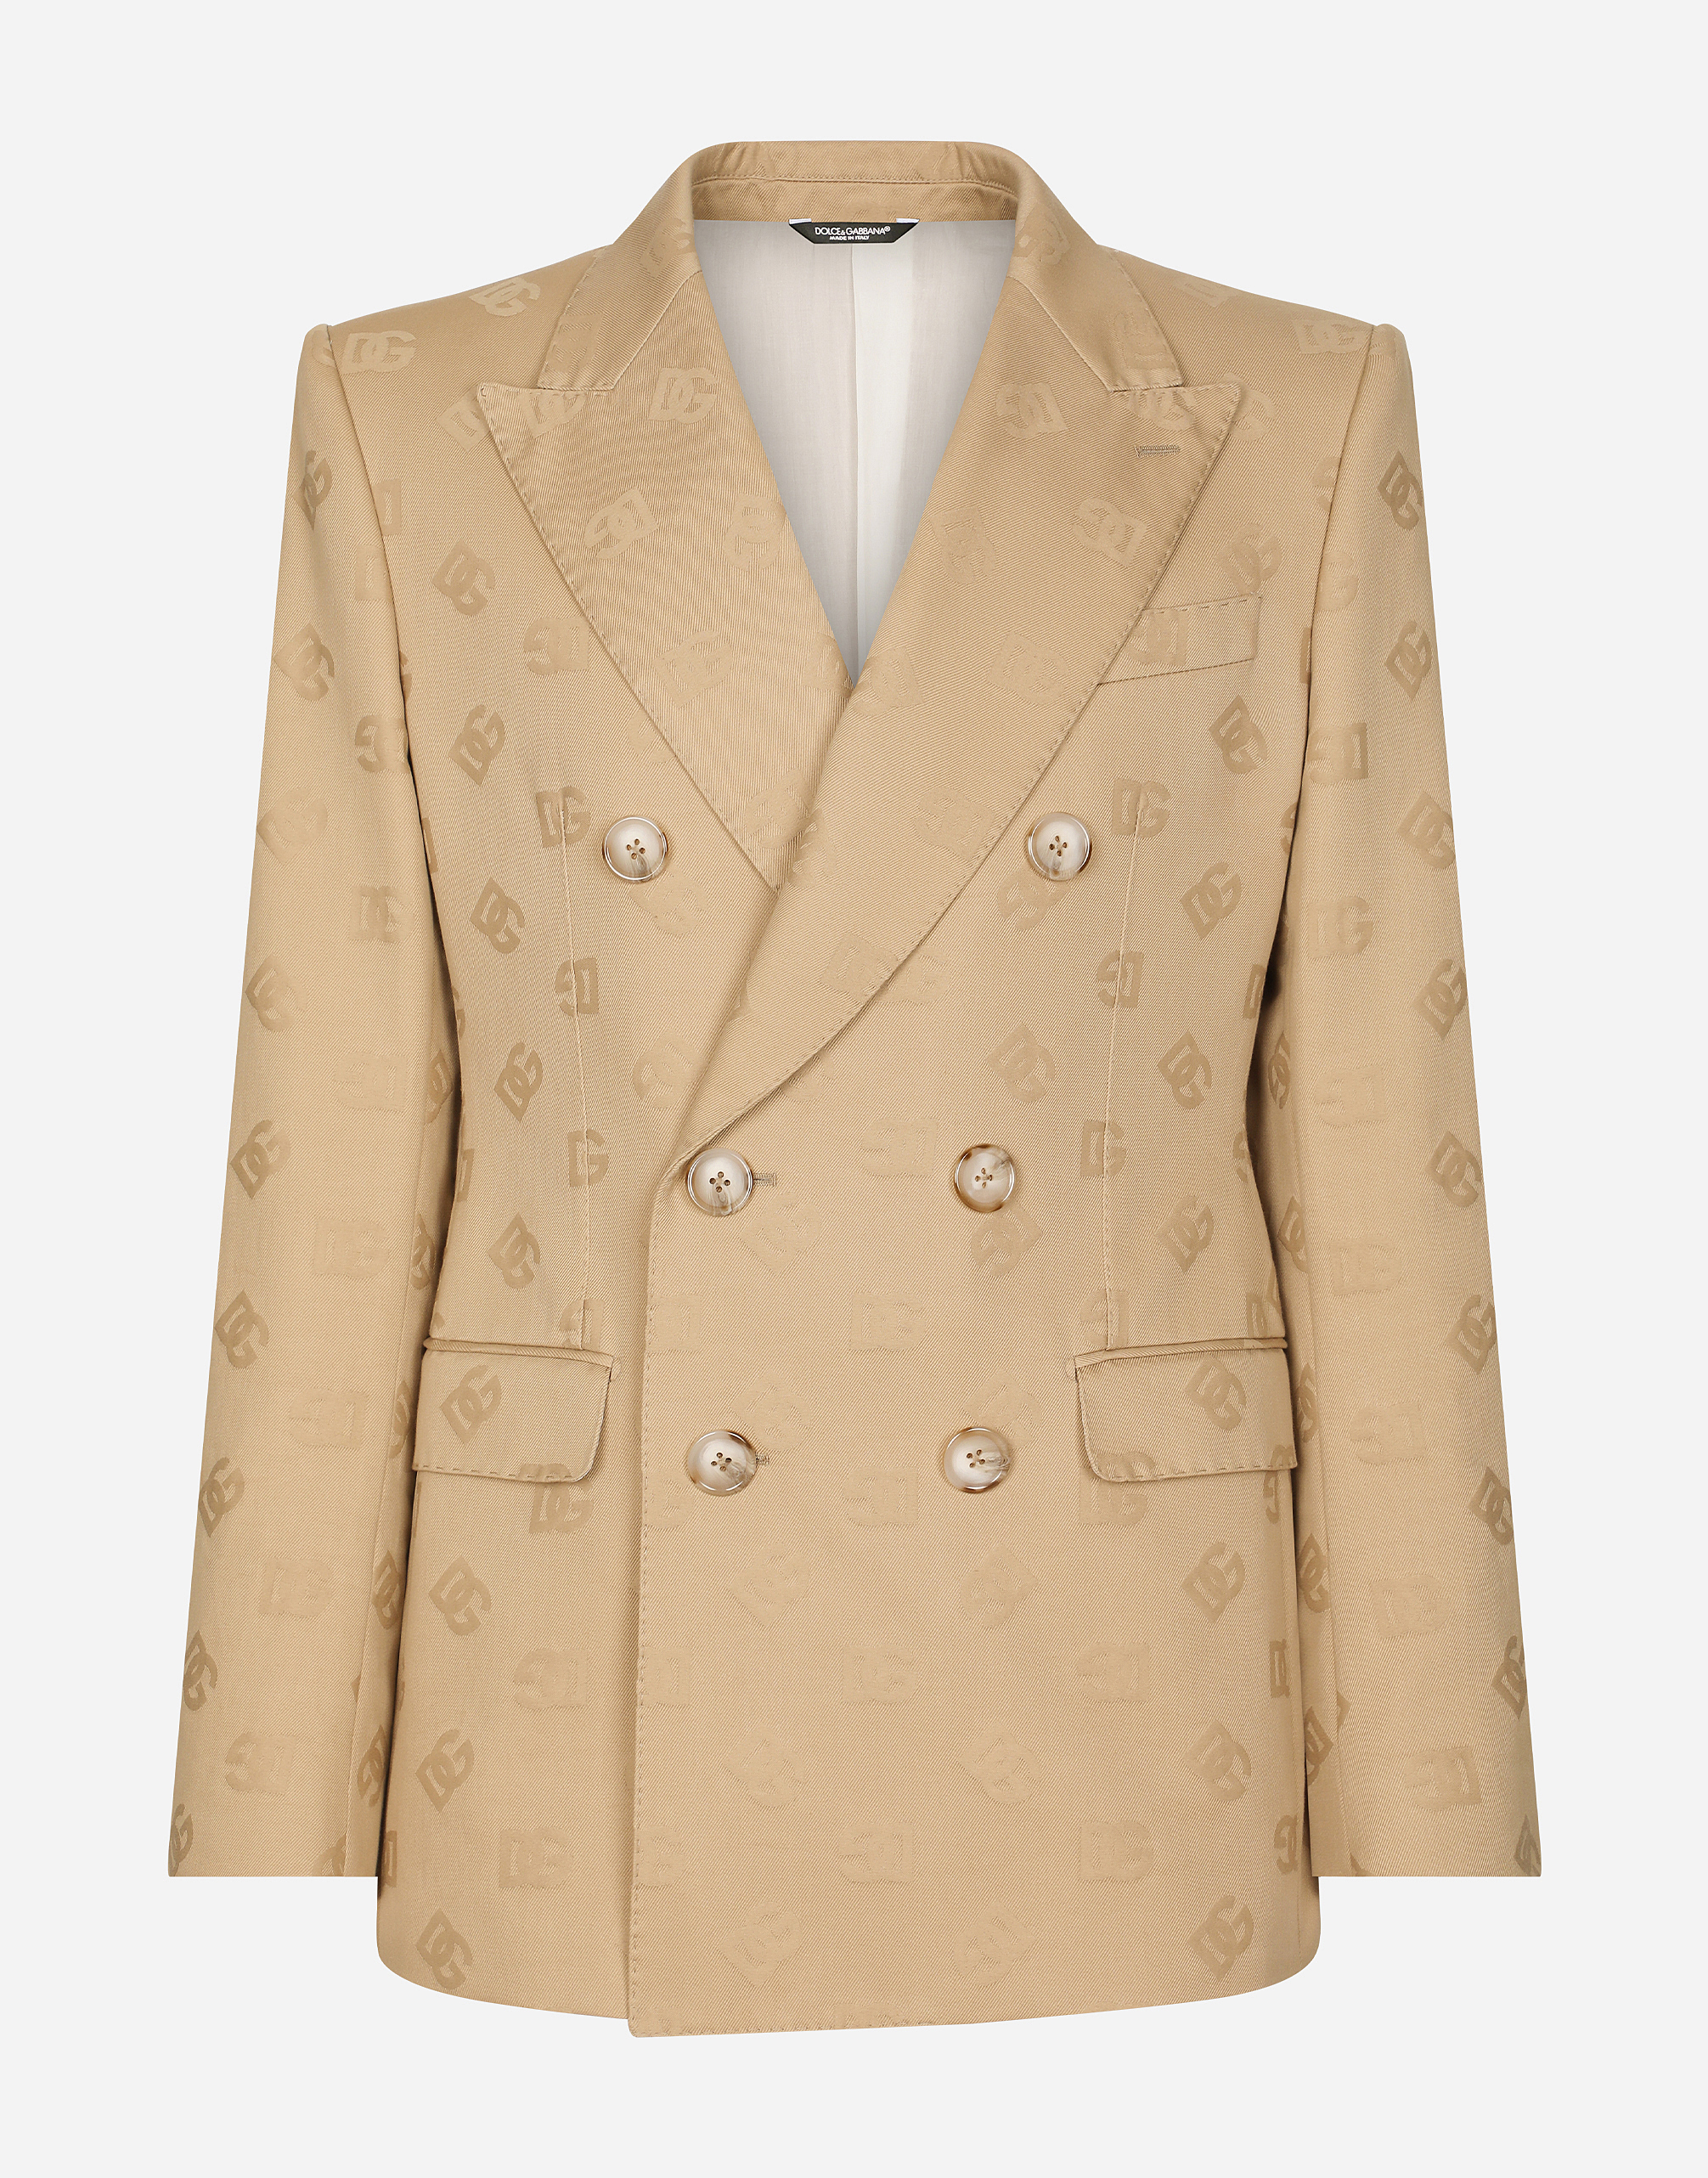 Dolce & Gabbana Tailored Double-breasted Cotton Jacket With Jacquard Dg Details In Beige